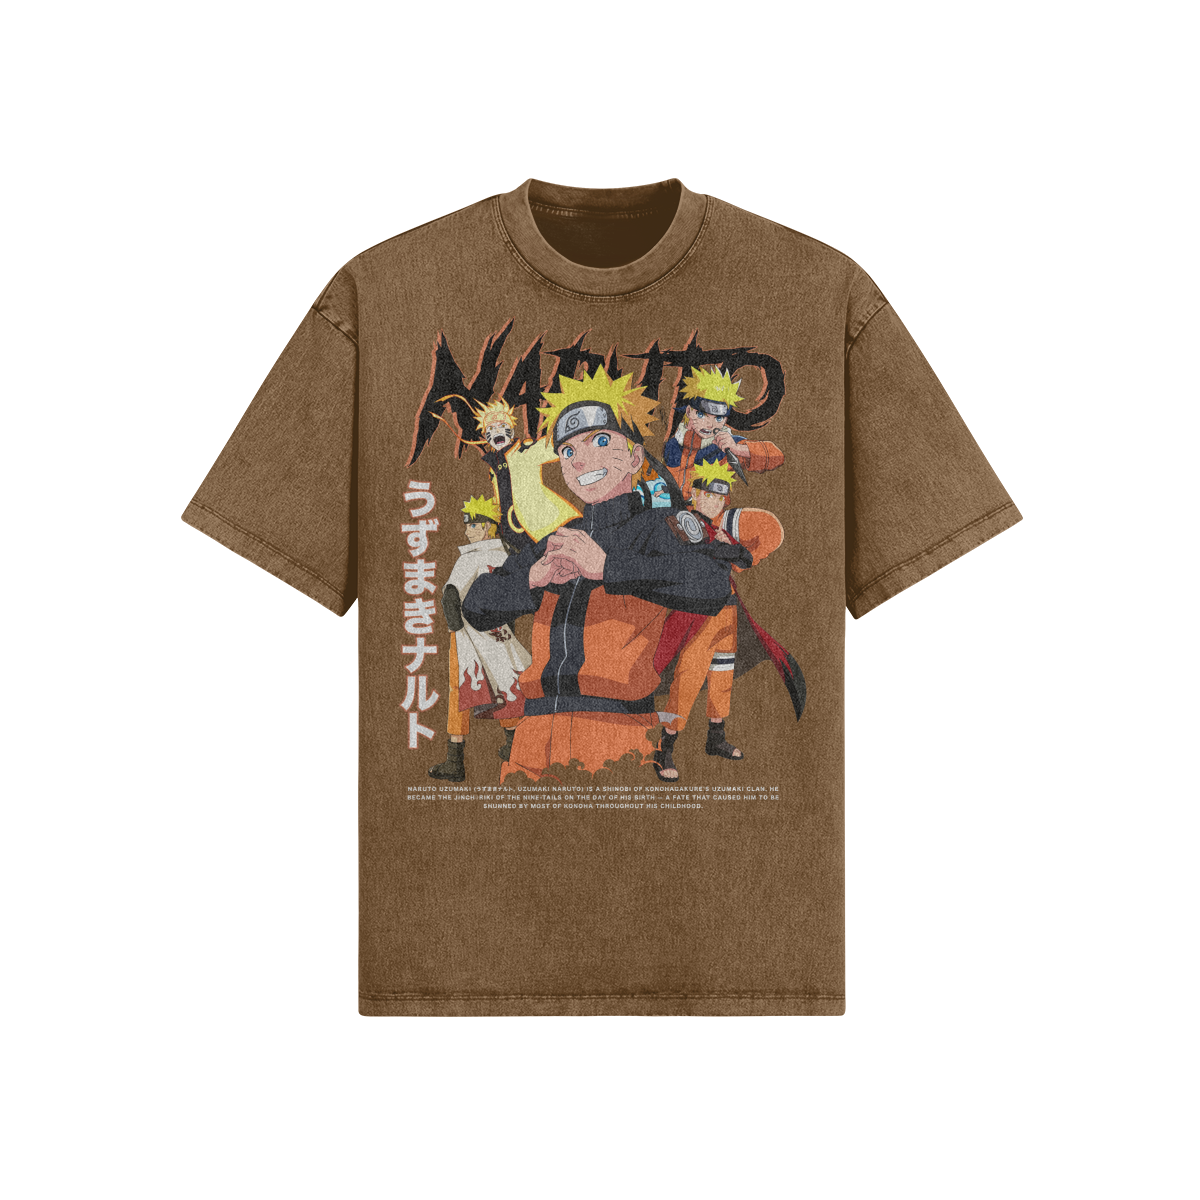 Naruto "All Forms" Vintage